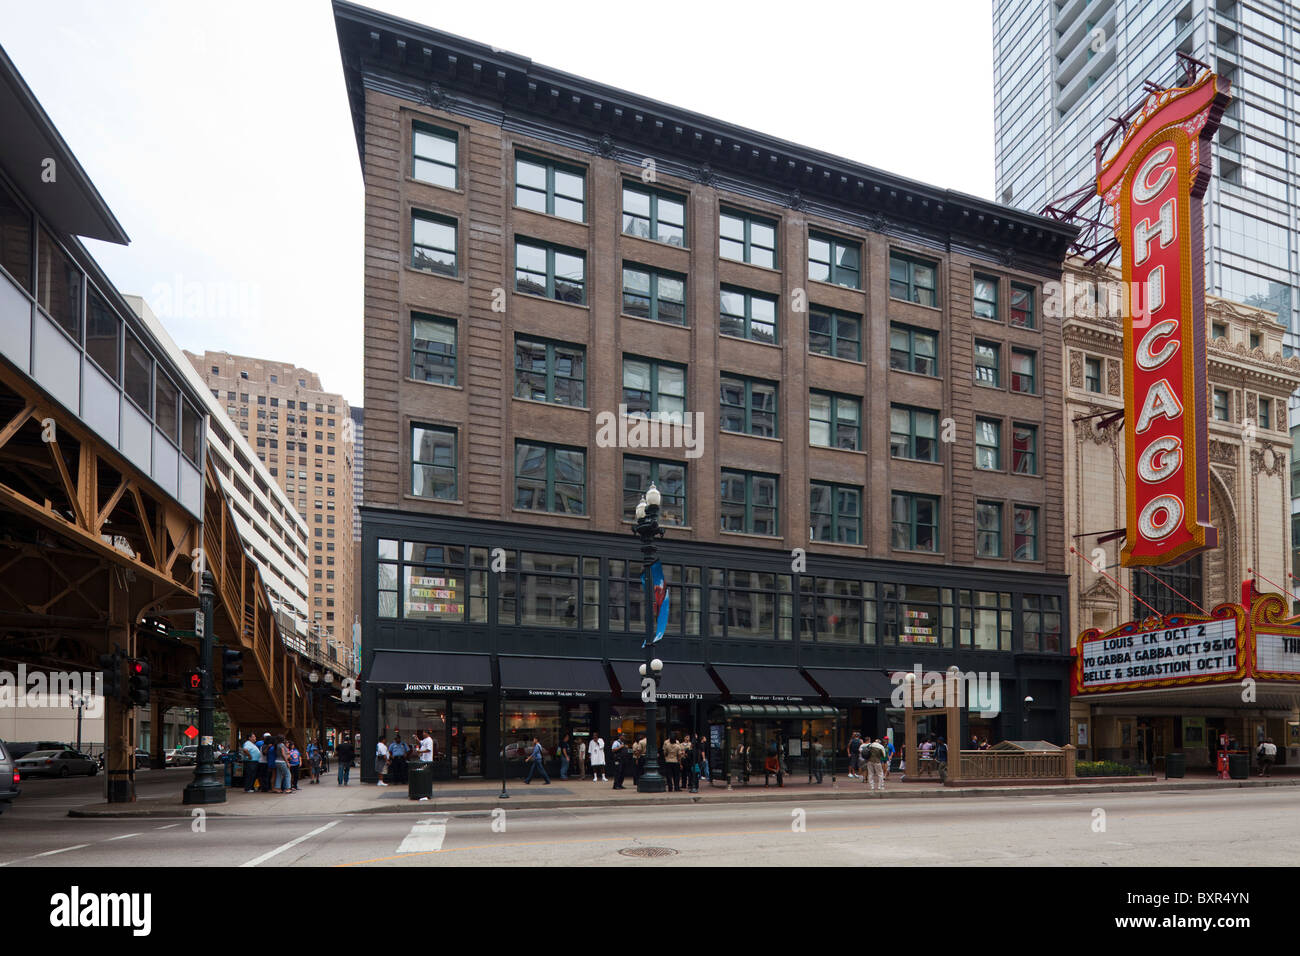 Page Brothers Building facade, Chicago, Illinois, USA Stock Photo